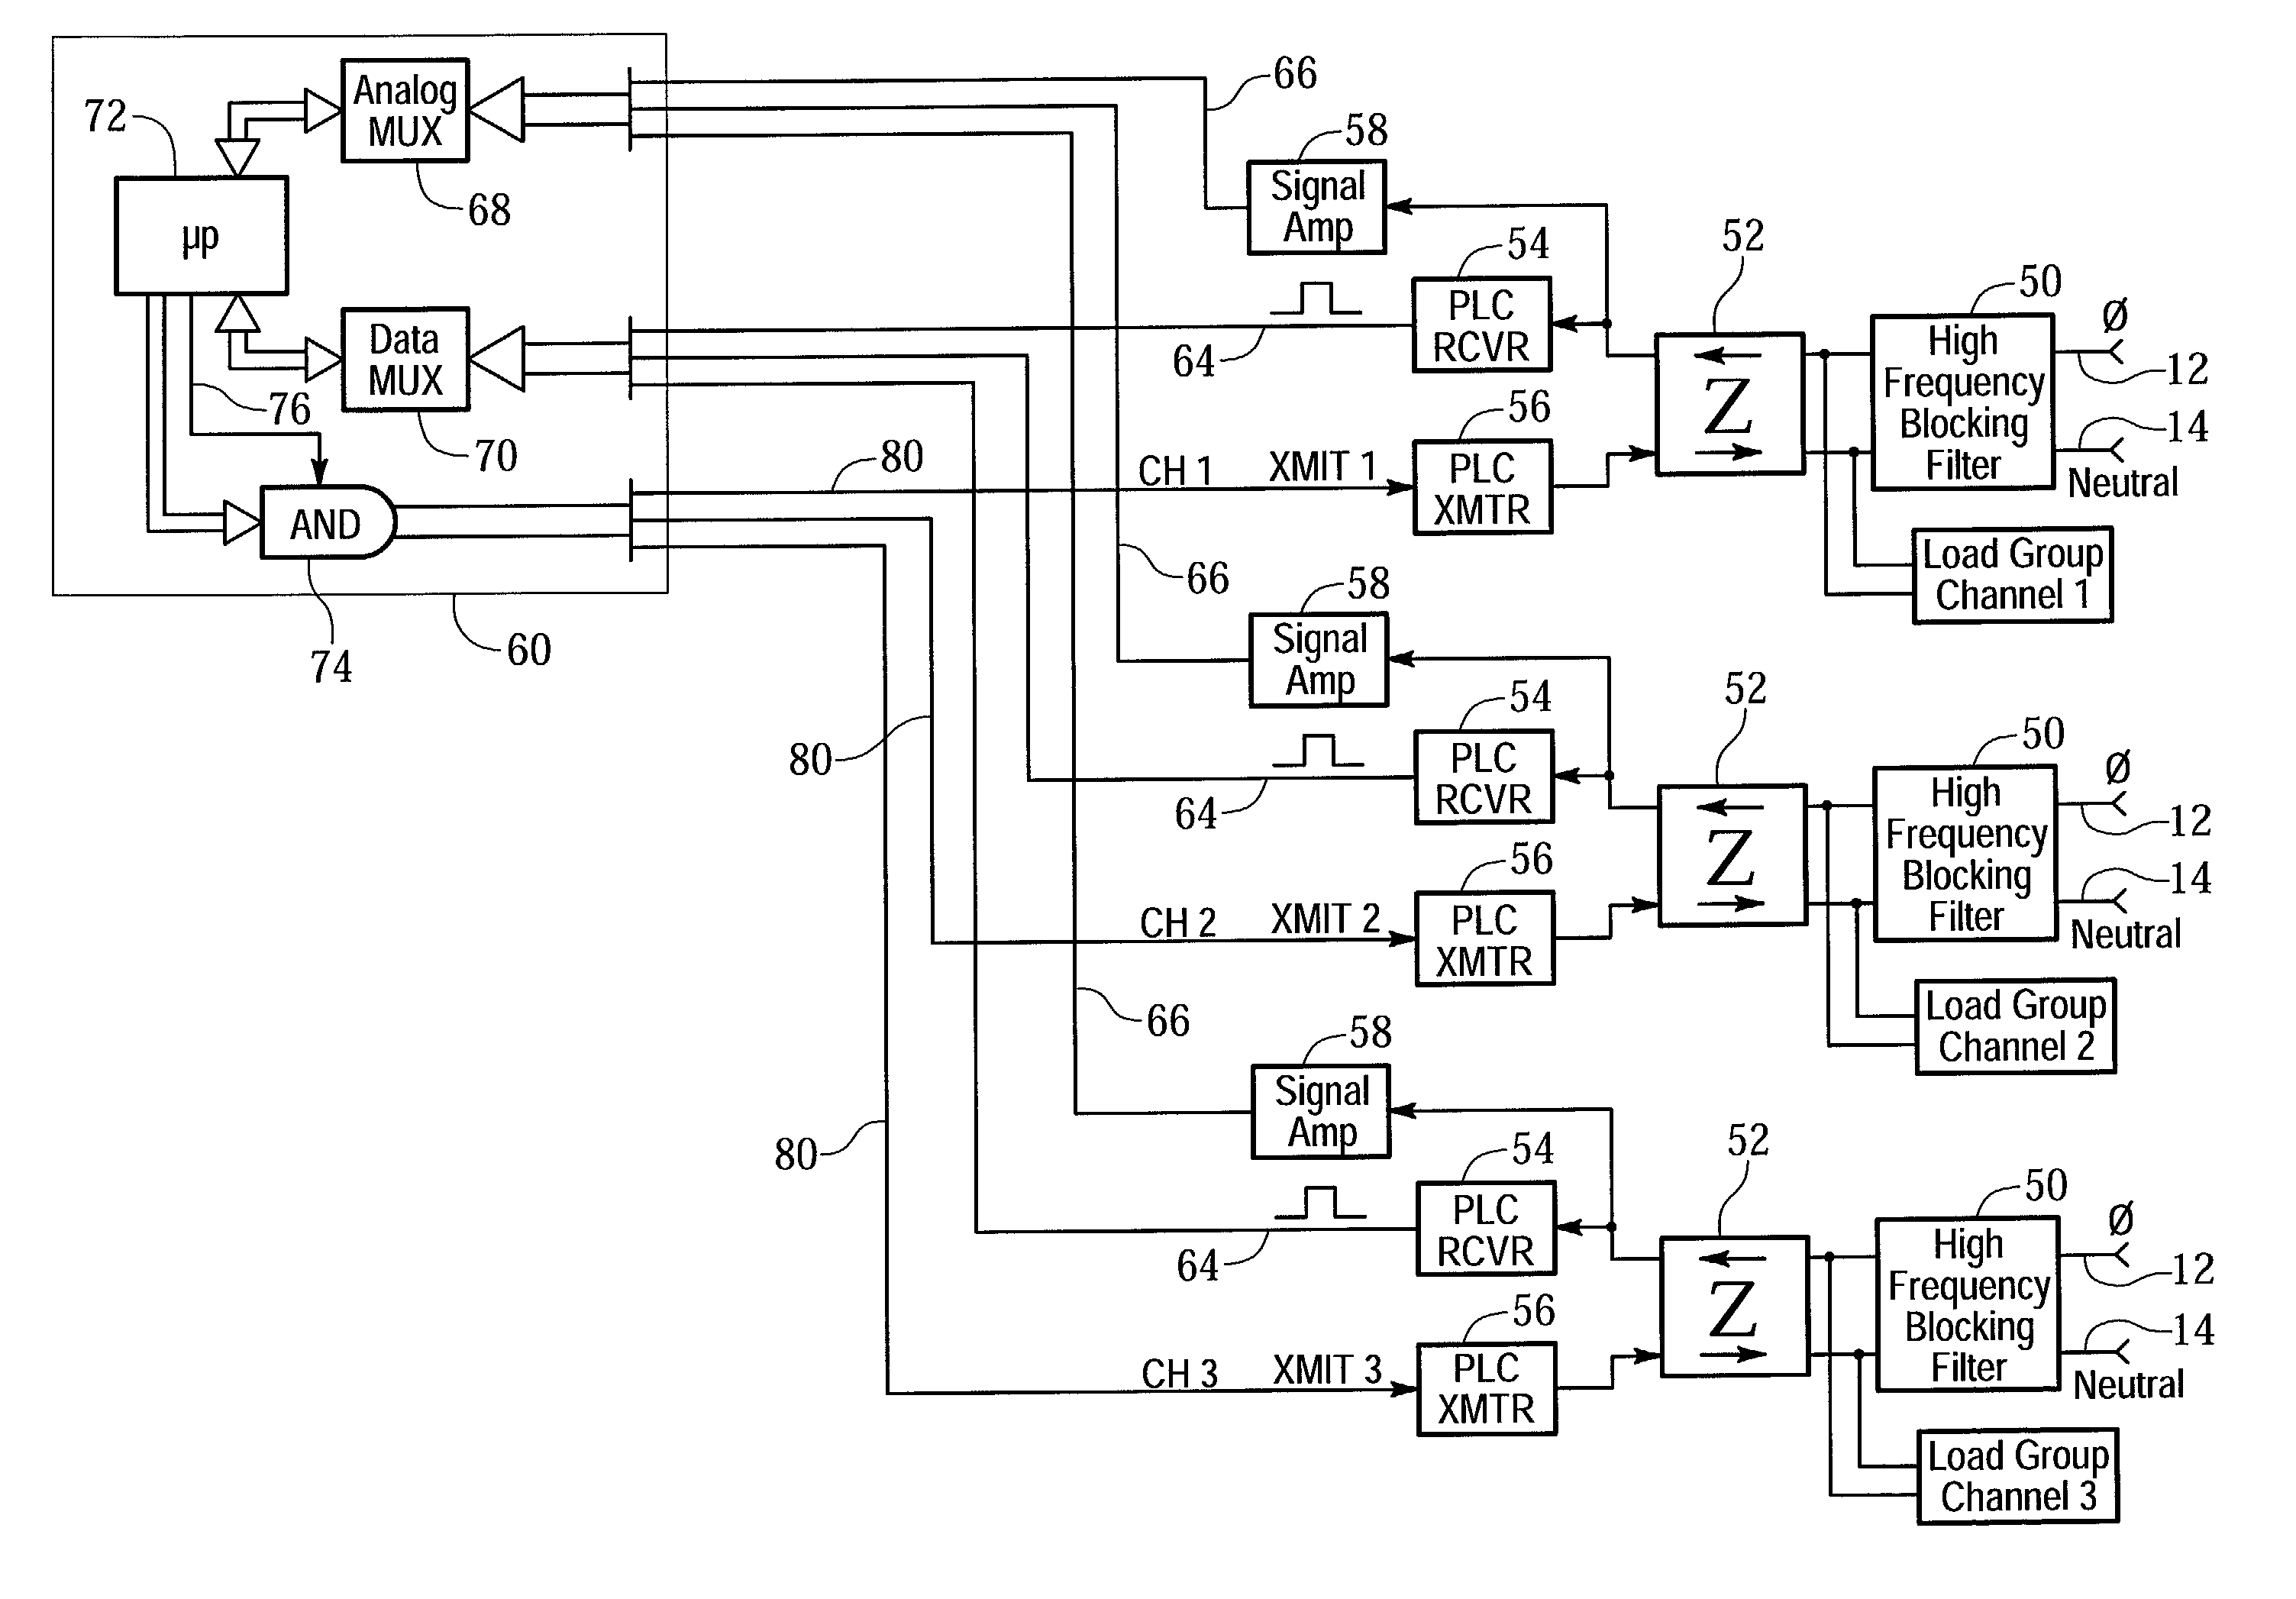 Repeater amplifier with signal firewall protection for power line carrier communication networks